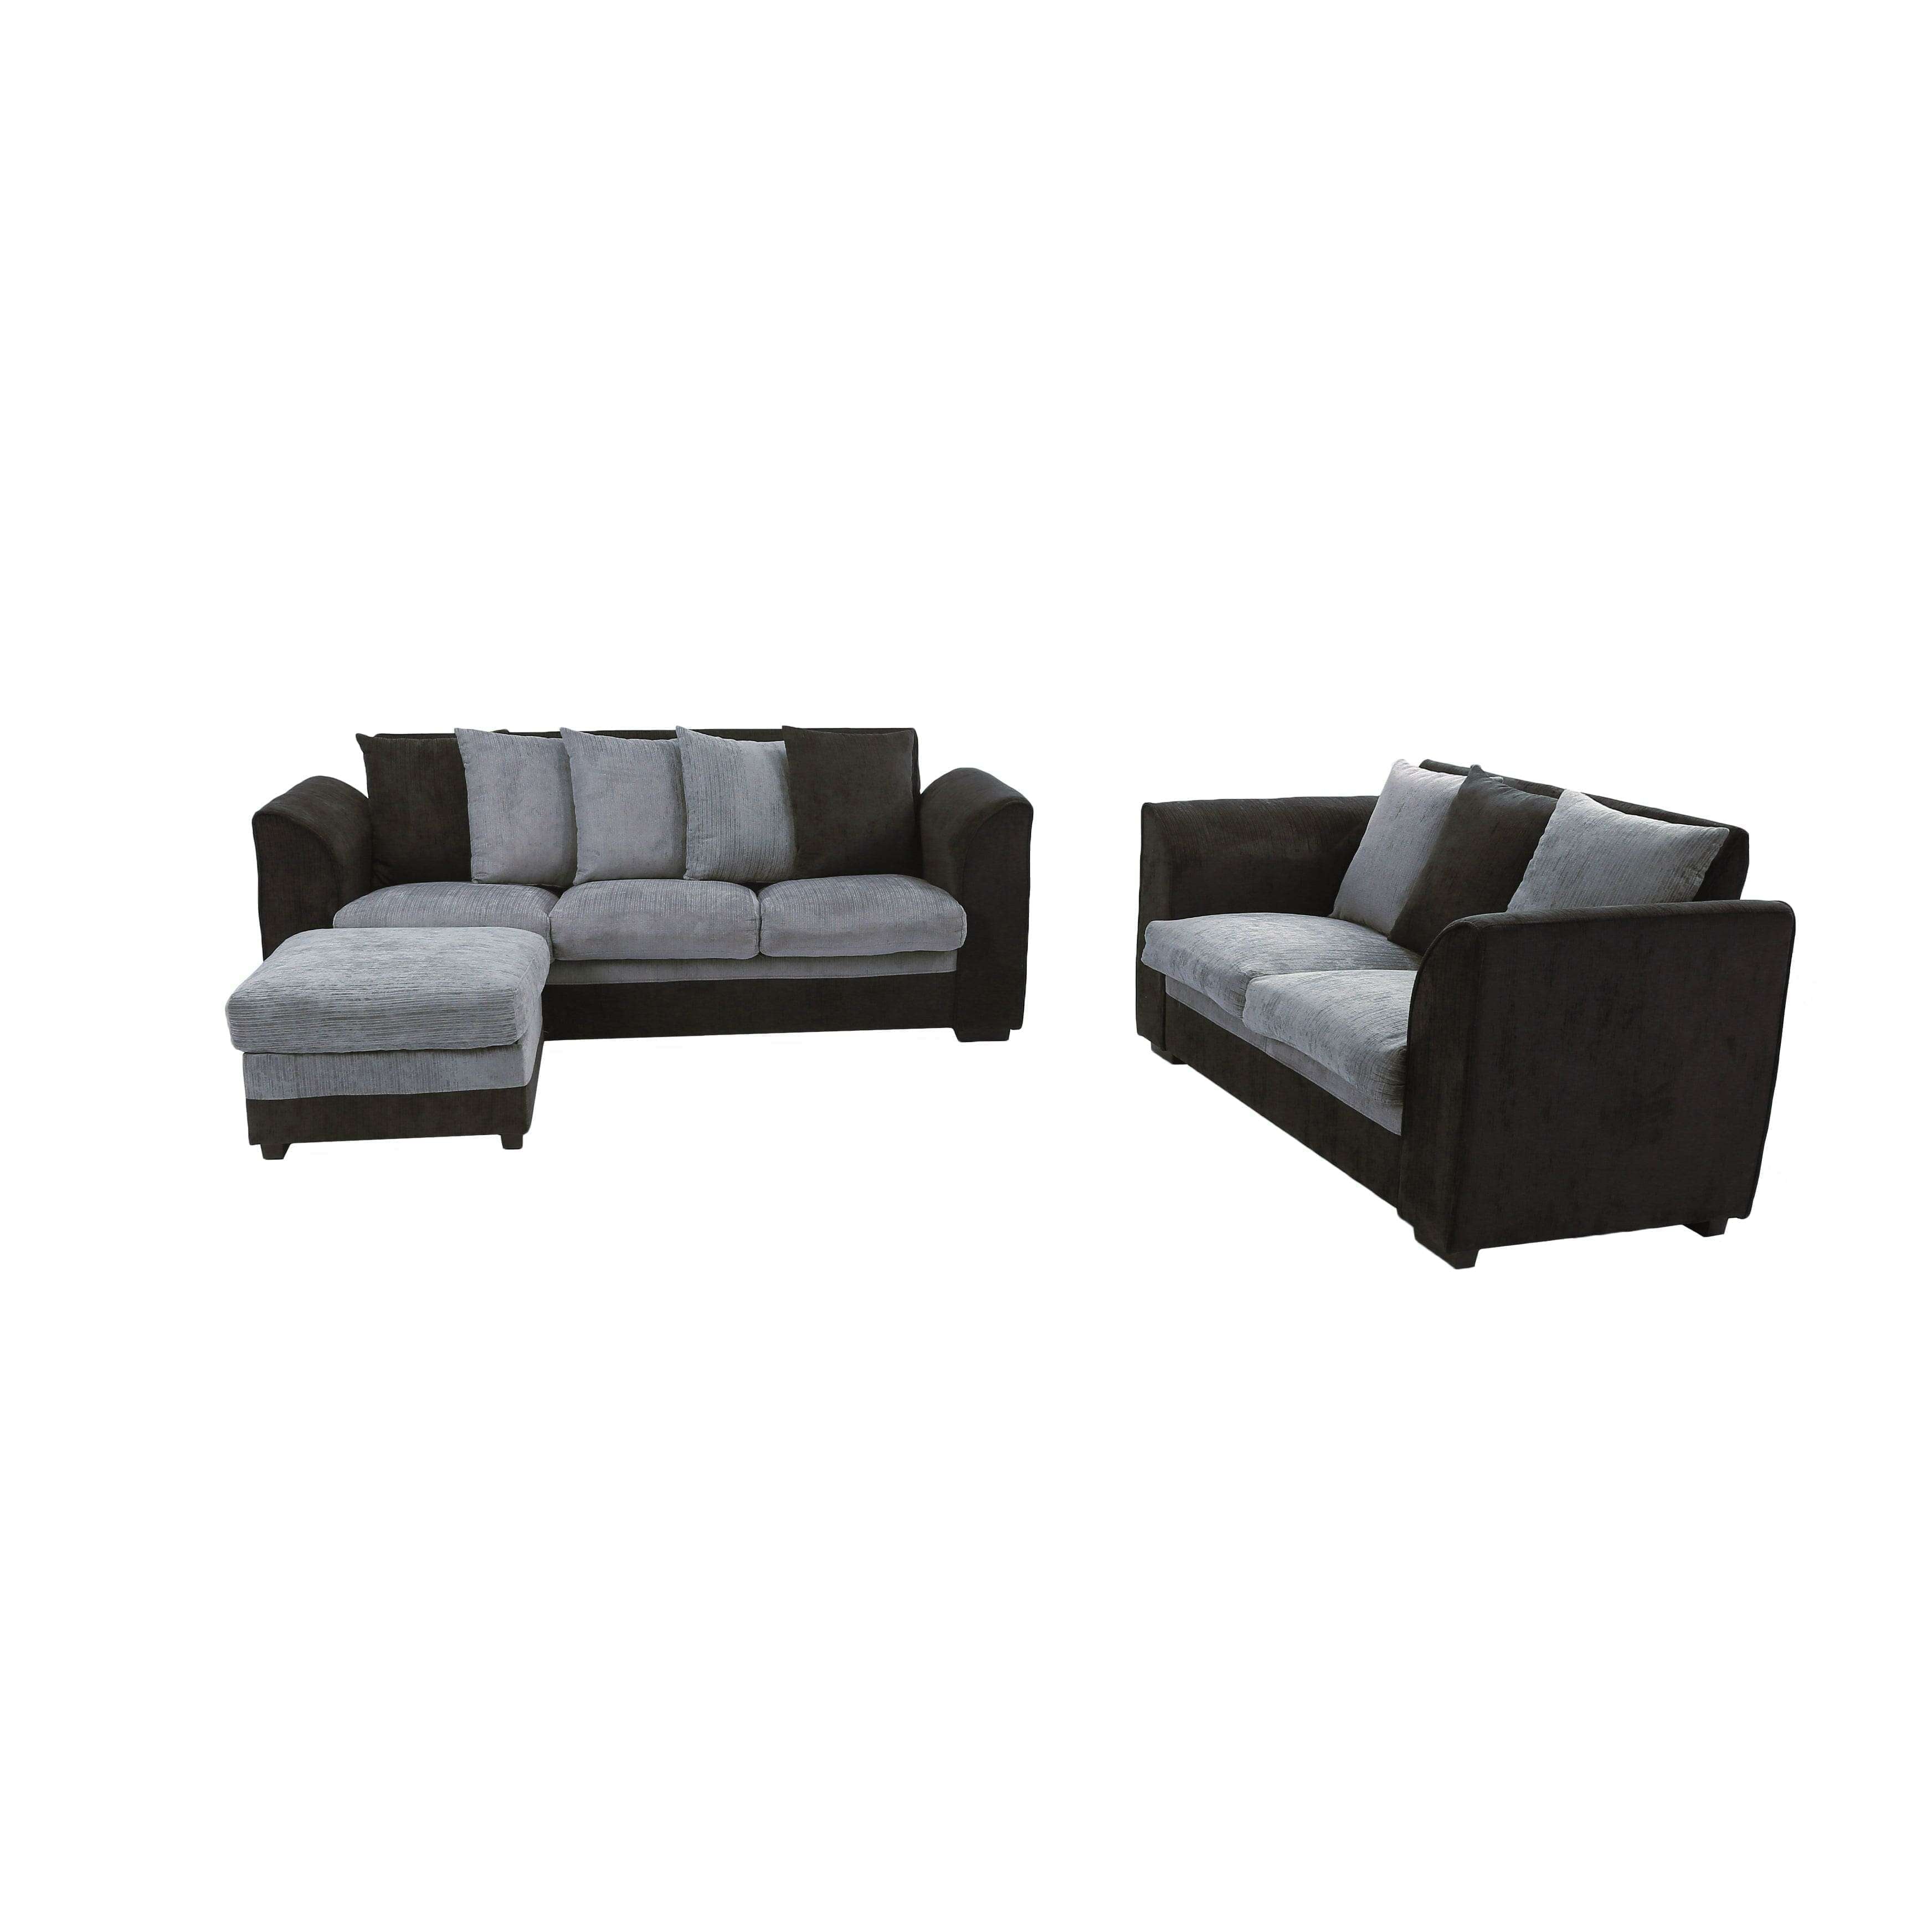 - 3 pcs Living room set by TFC&H Co.（Sofa+Loveseat+Ottoman）- Ships from The US - Sofas & Sectionals at TFC&H Co.